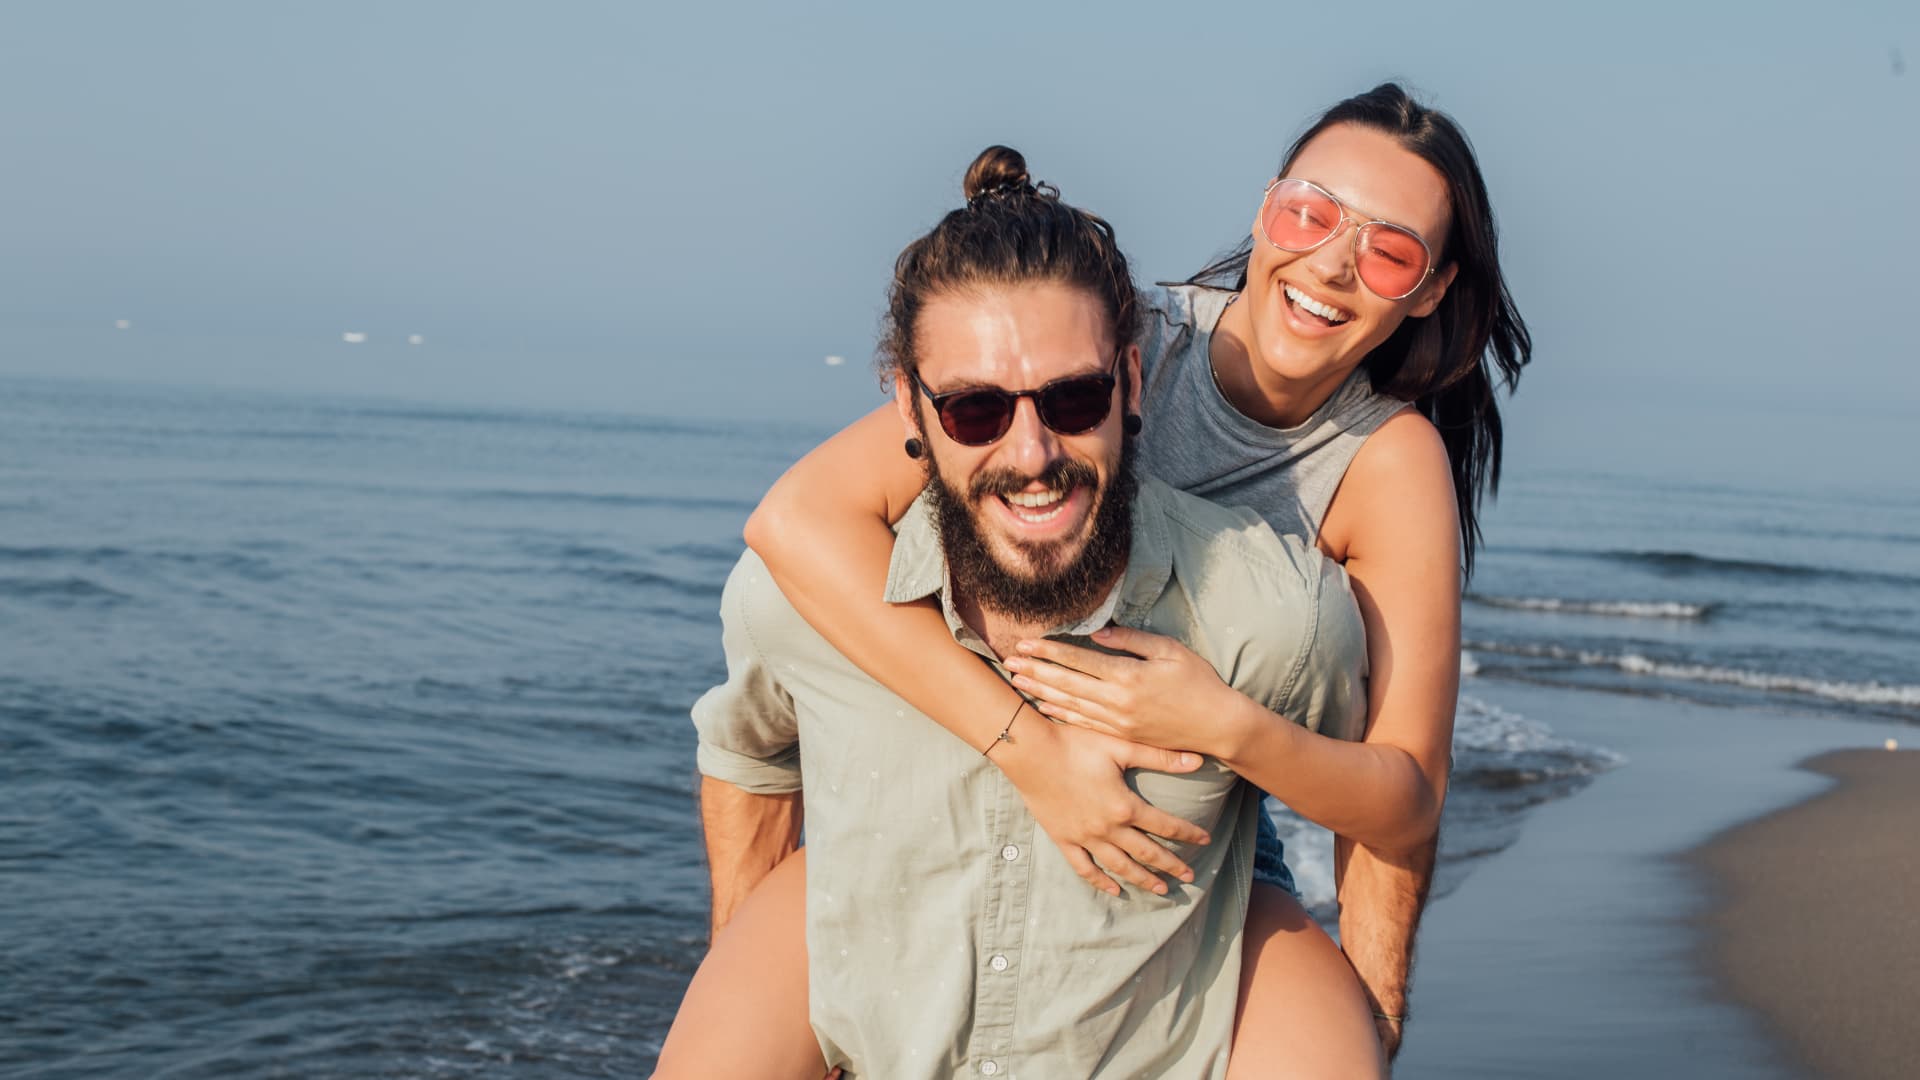 We've studied over 30,000 couples—here are 6 phrases you'll hear in the most successful relationships